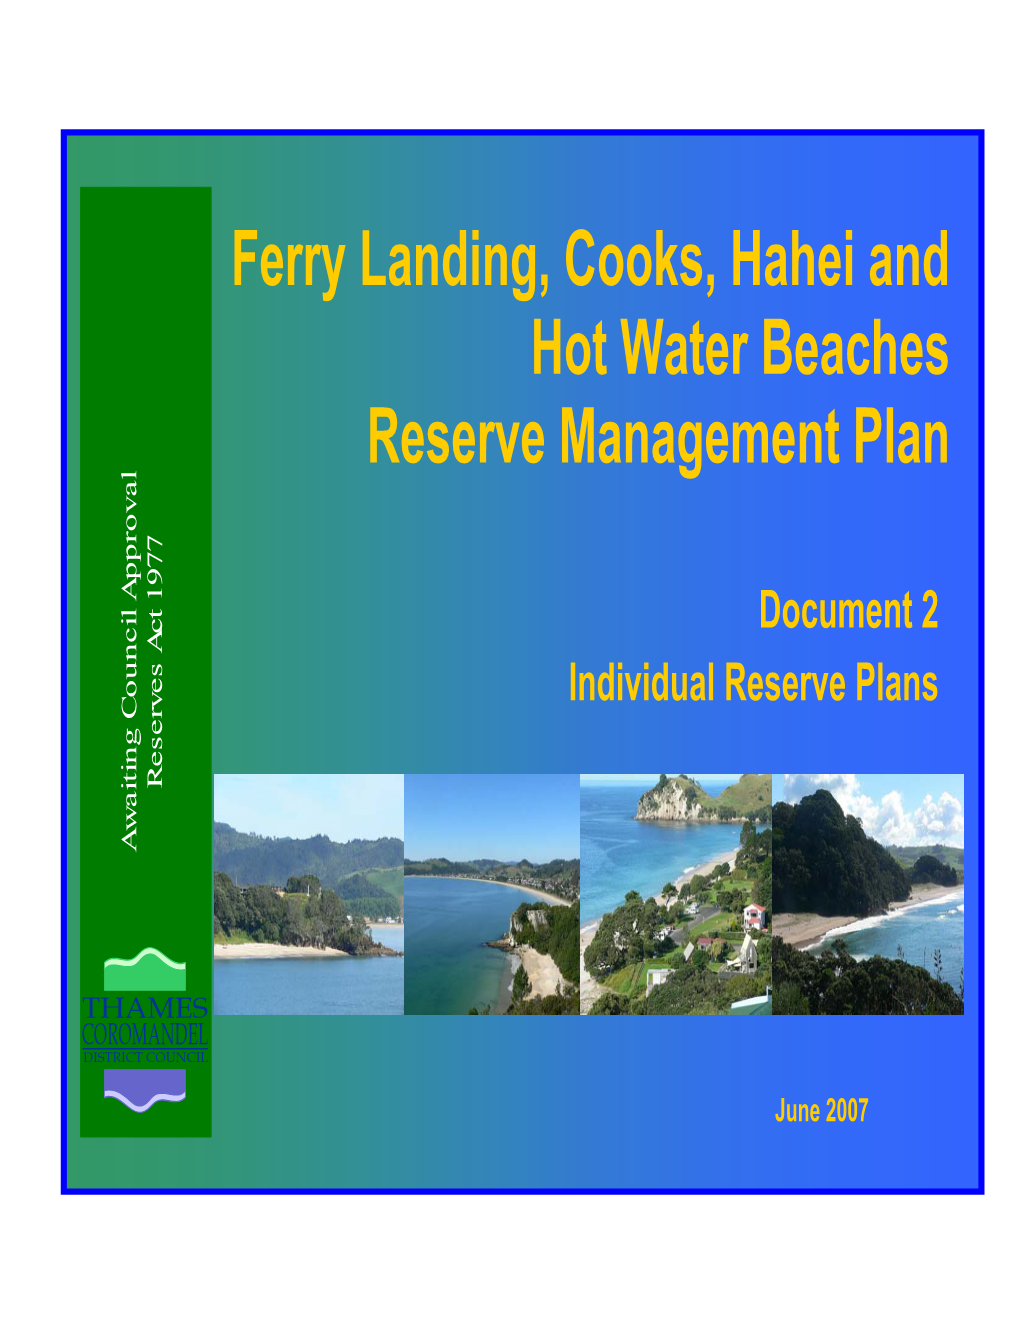 Ferry Landing, Cooks, Hahei and Hot Water Beaches Reserve Management Plan